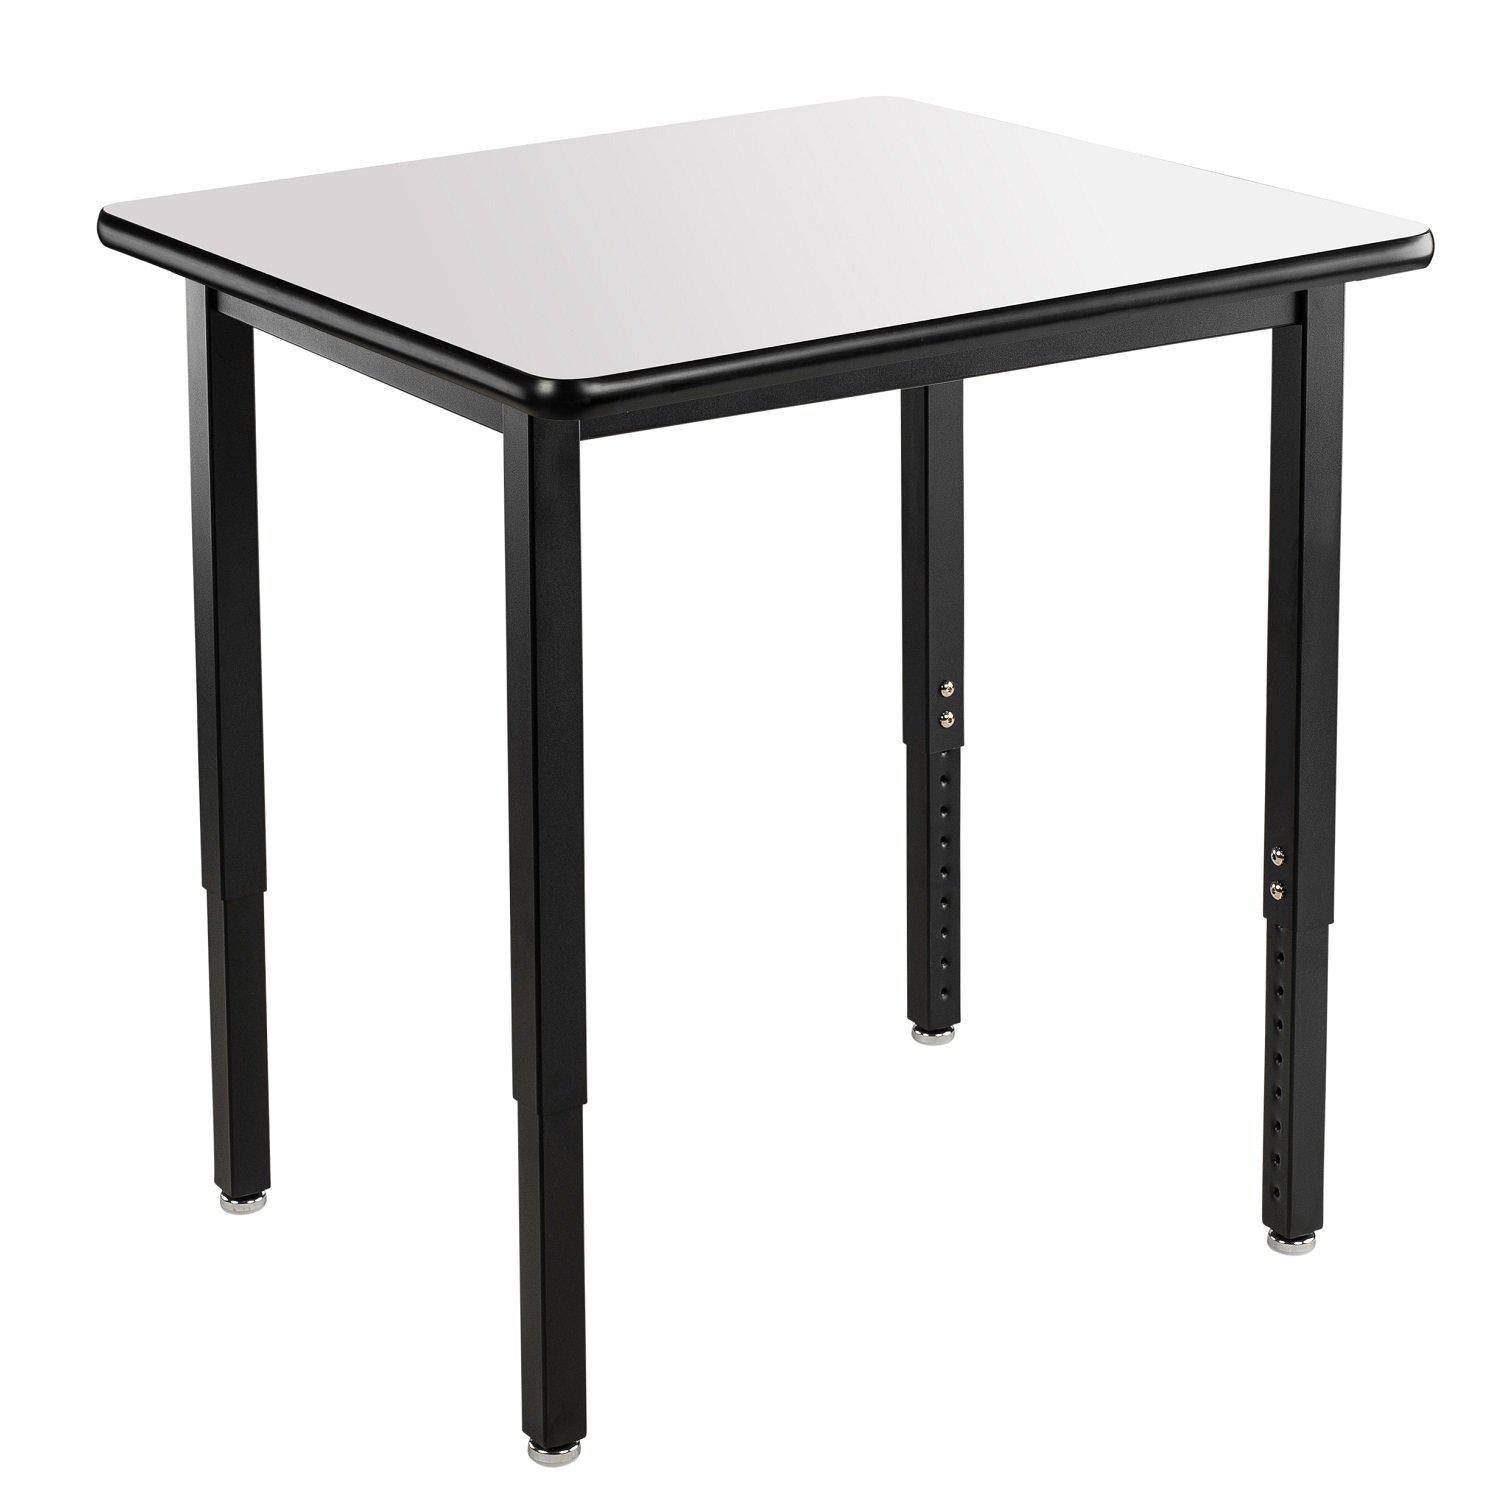 Heavy-Duty Height-Adjustable Utility Table, Black Frame, 36" x 36", Whiteboard High-Pressure Laminate Top